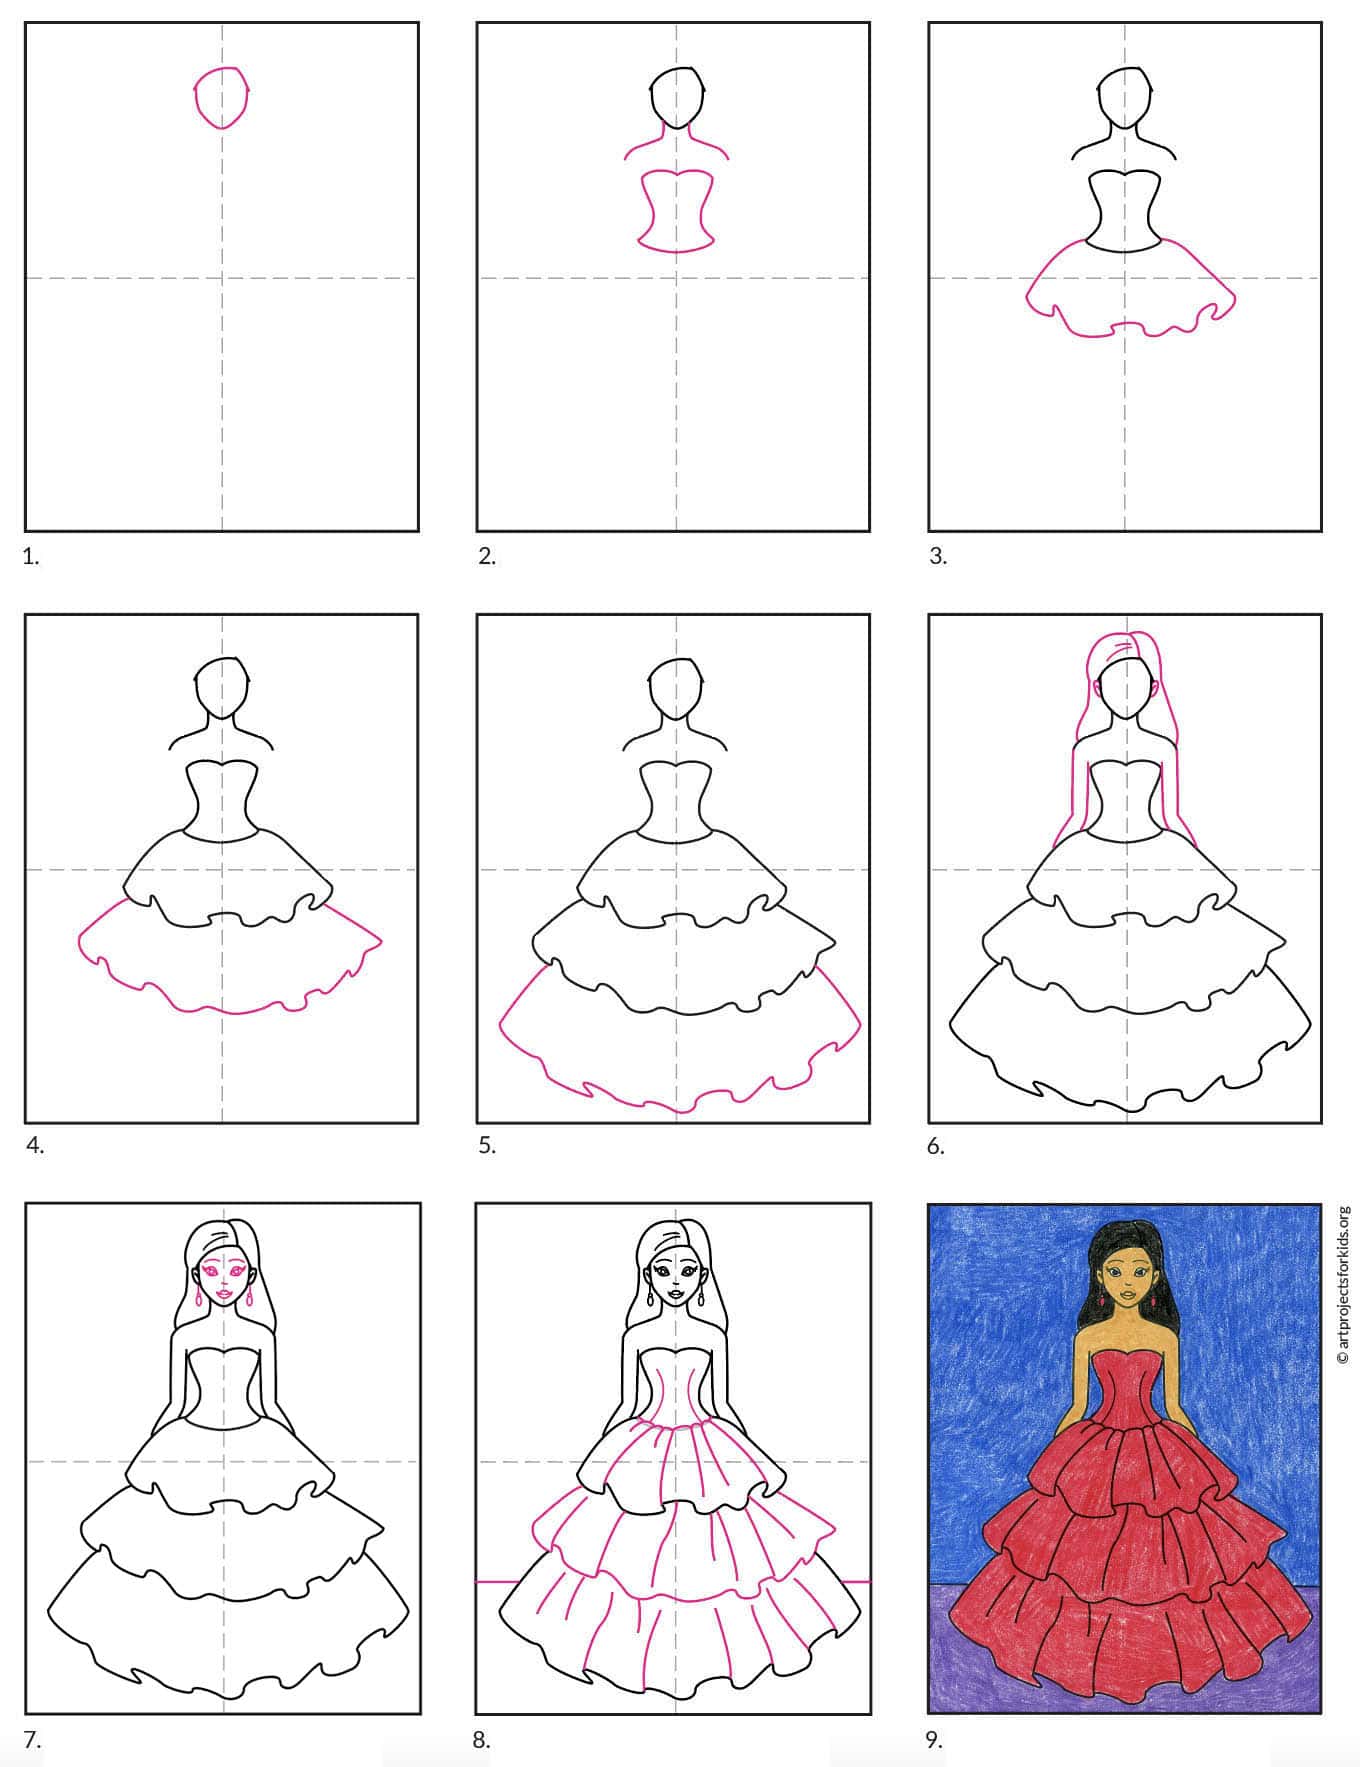  How To Draw Dresses Step By Step For Beginners in the world The ultimate guide 